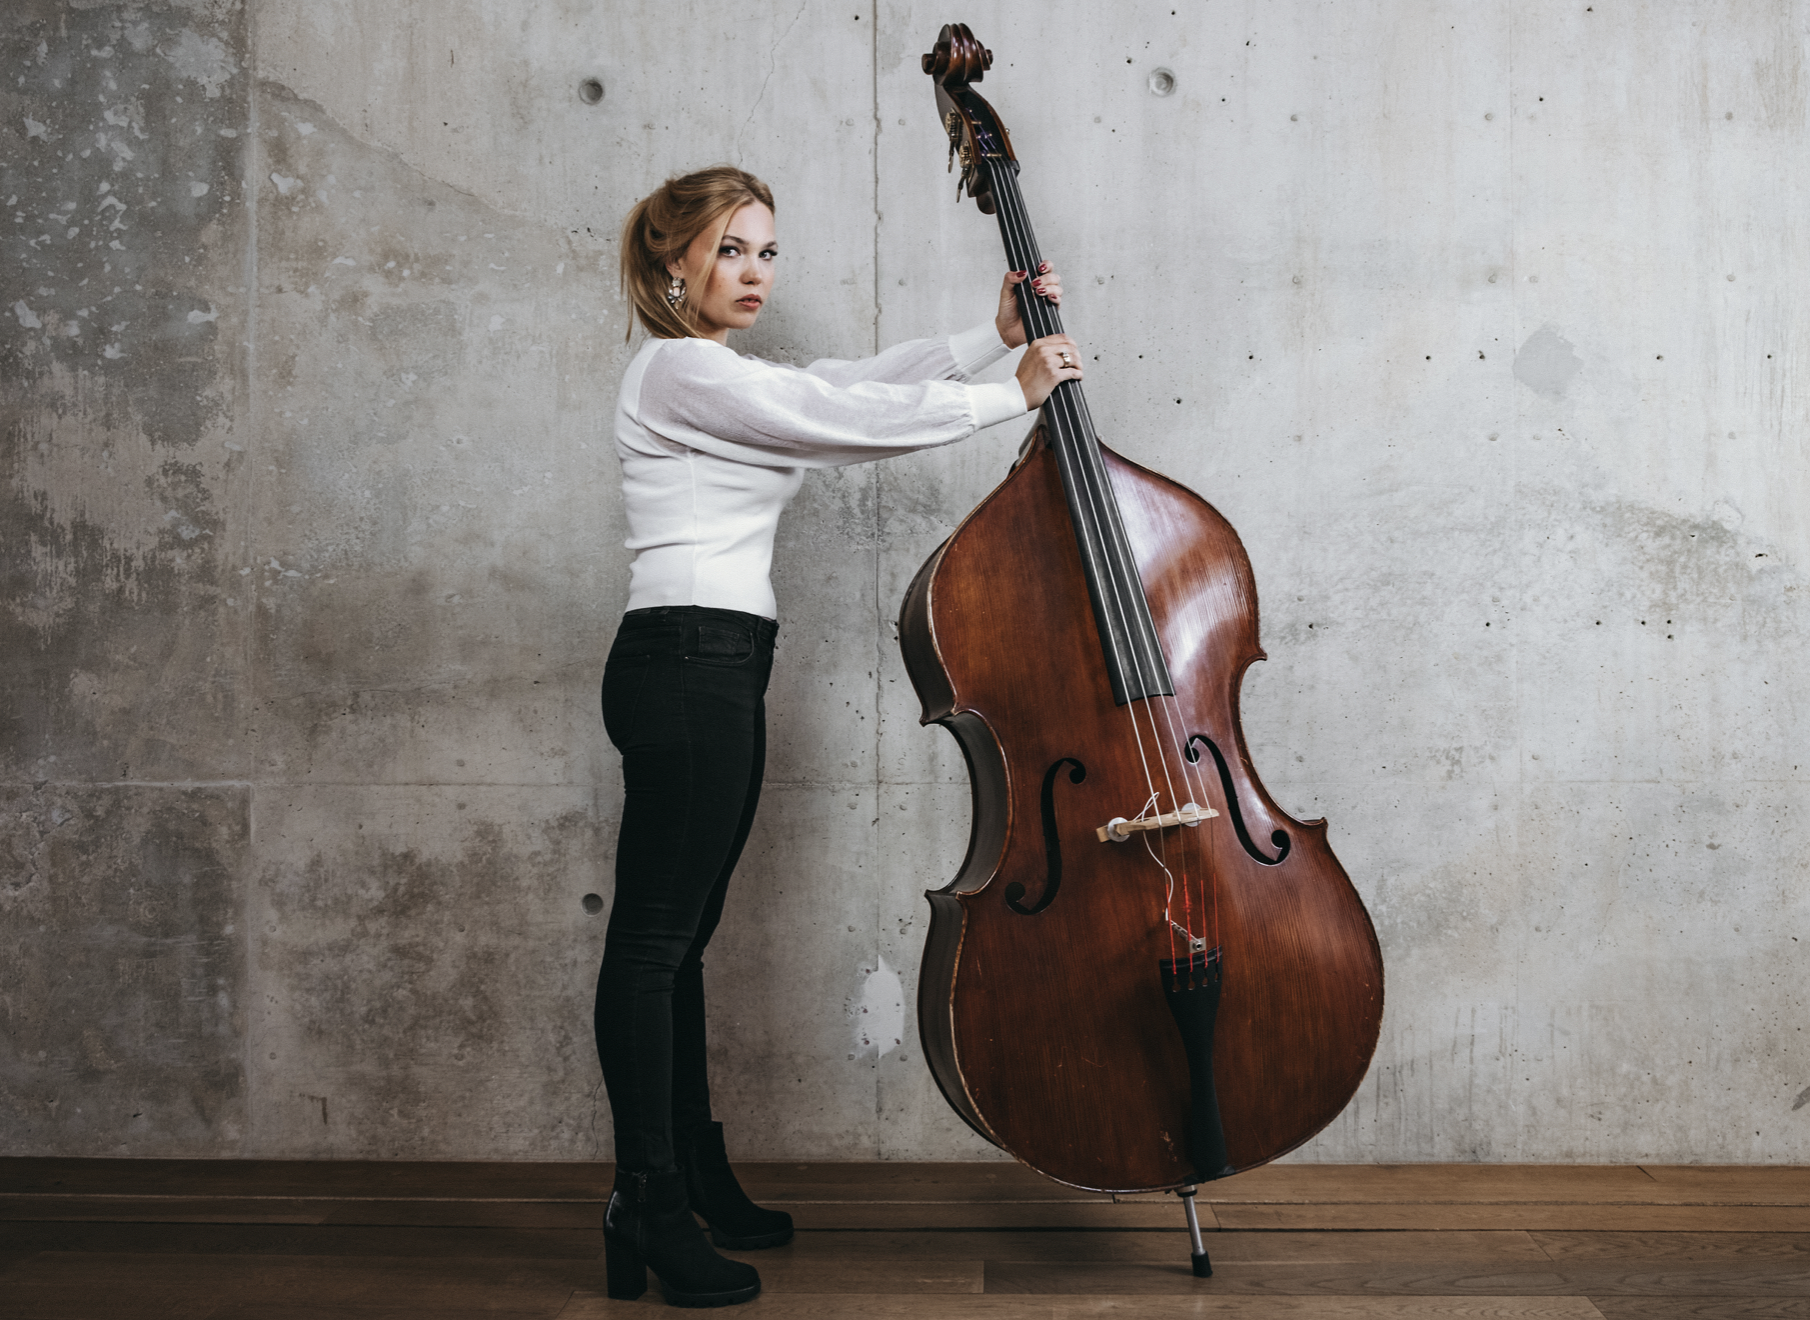 The double bass: a comprehensive guide to the orchestra's largest